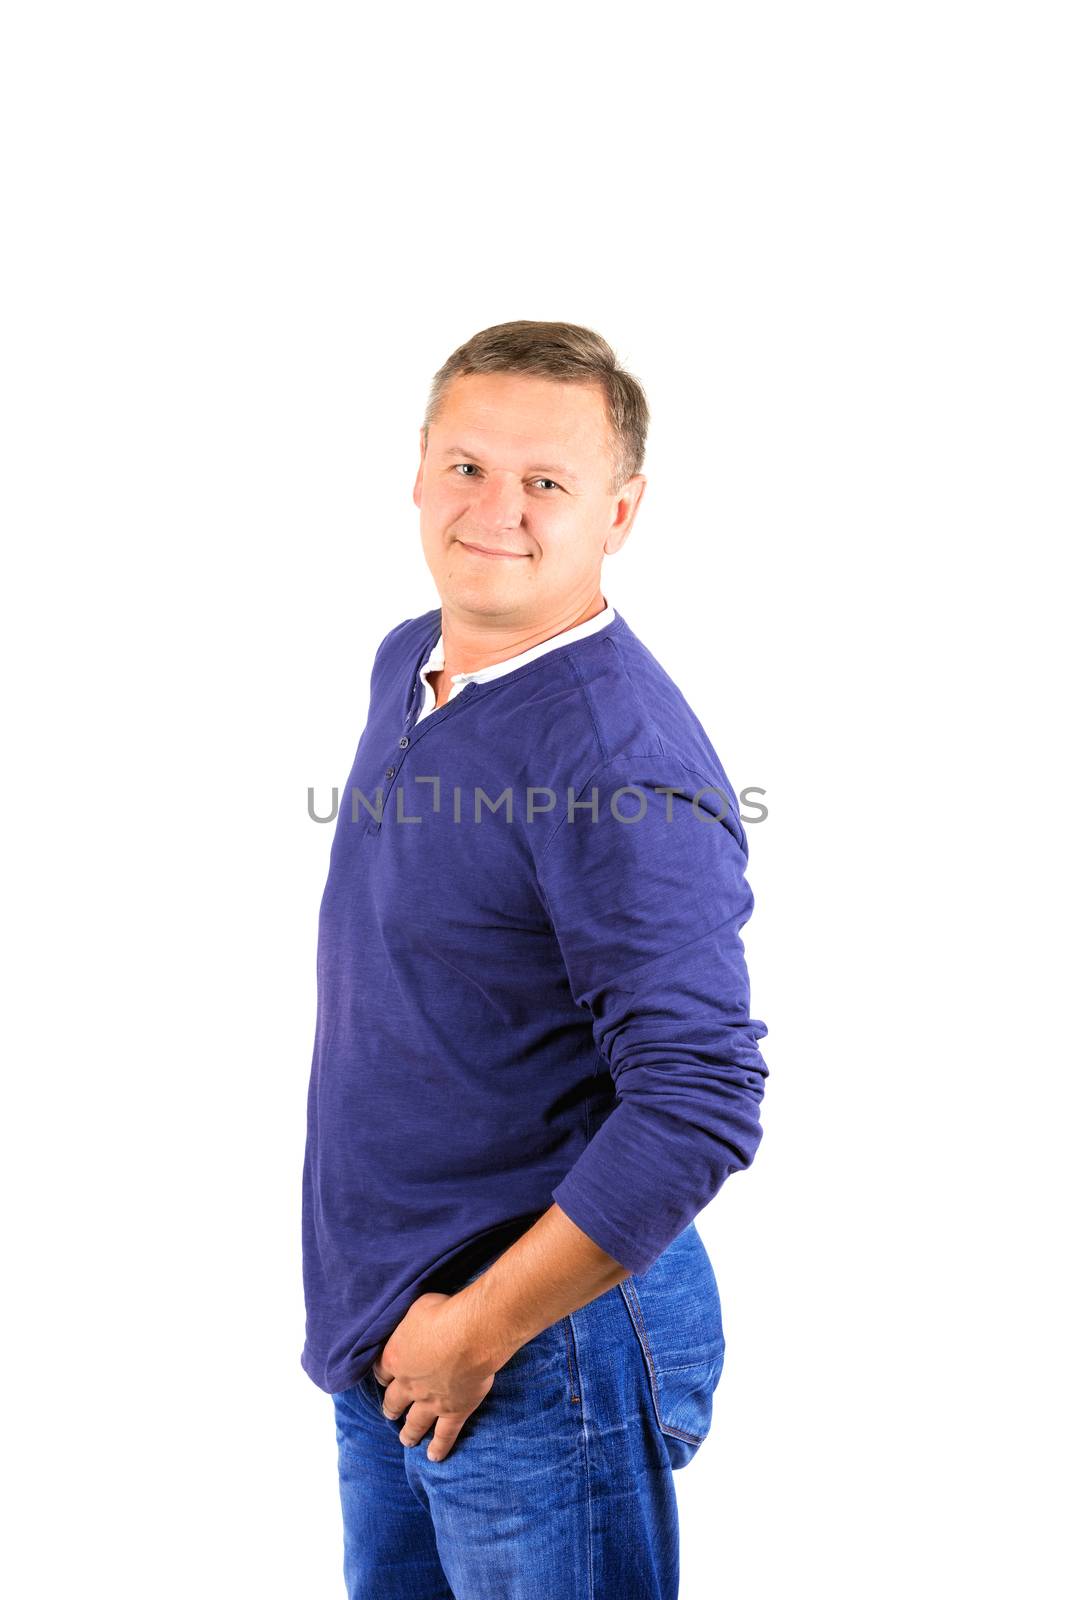 Casually dressed middle aged man smiling. 3/4 view of man shot in vertical format isolated on white.